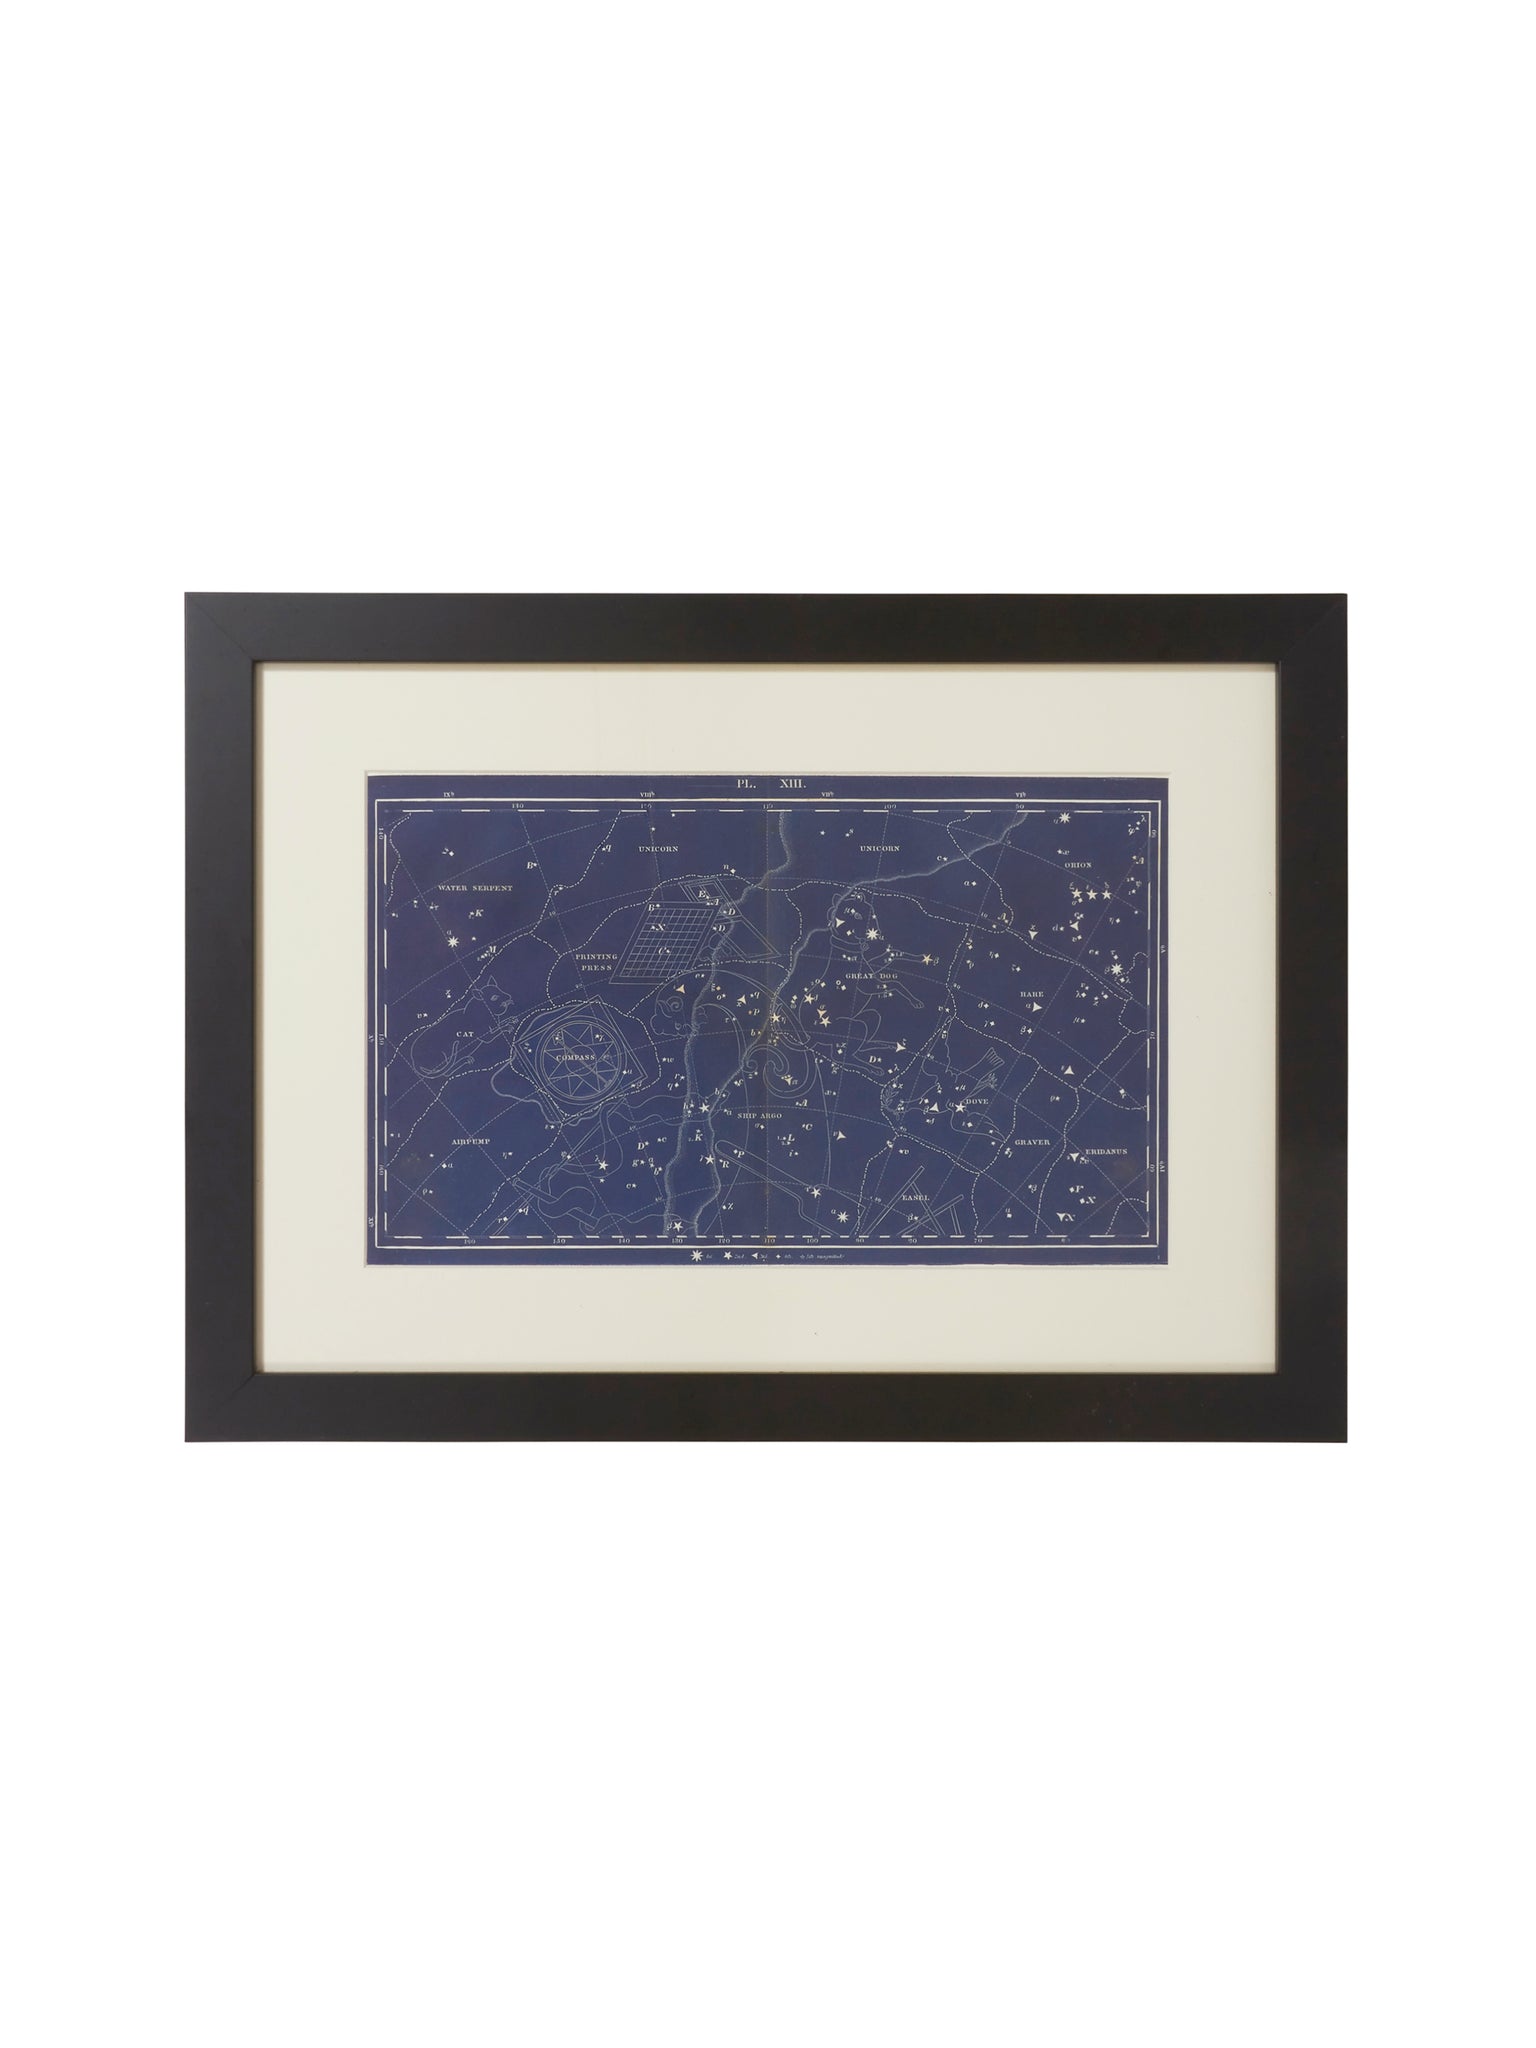 Vintage 1840s Astronomy Map Weston Table